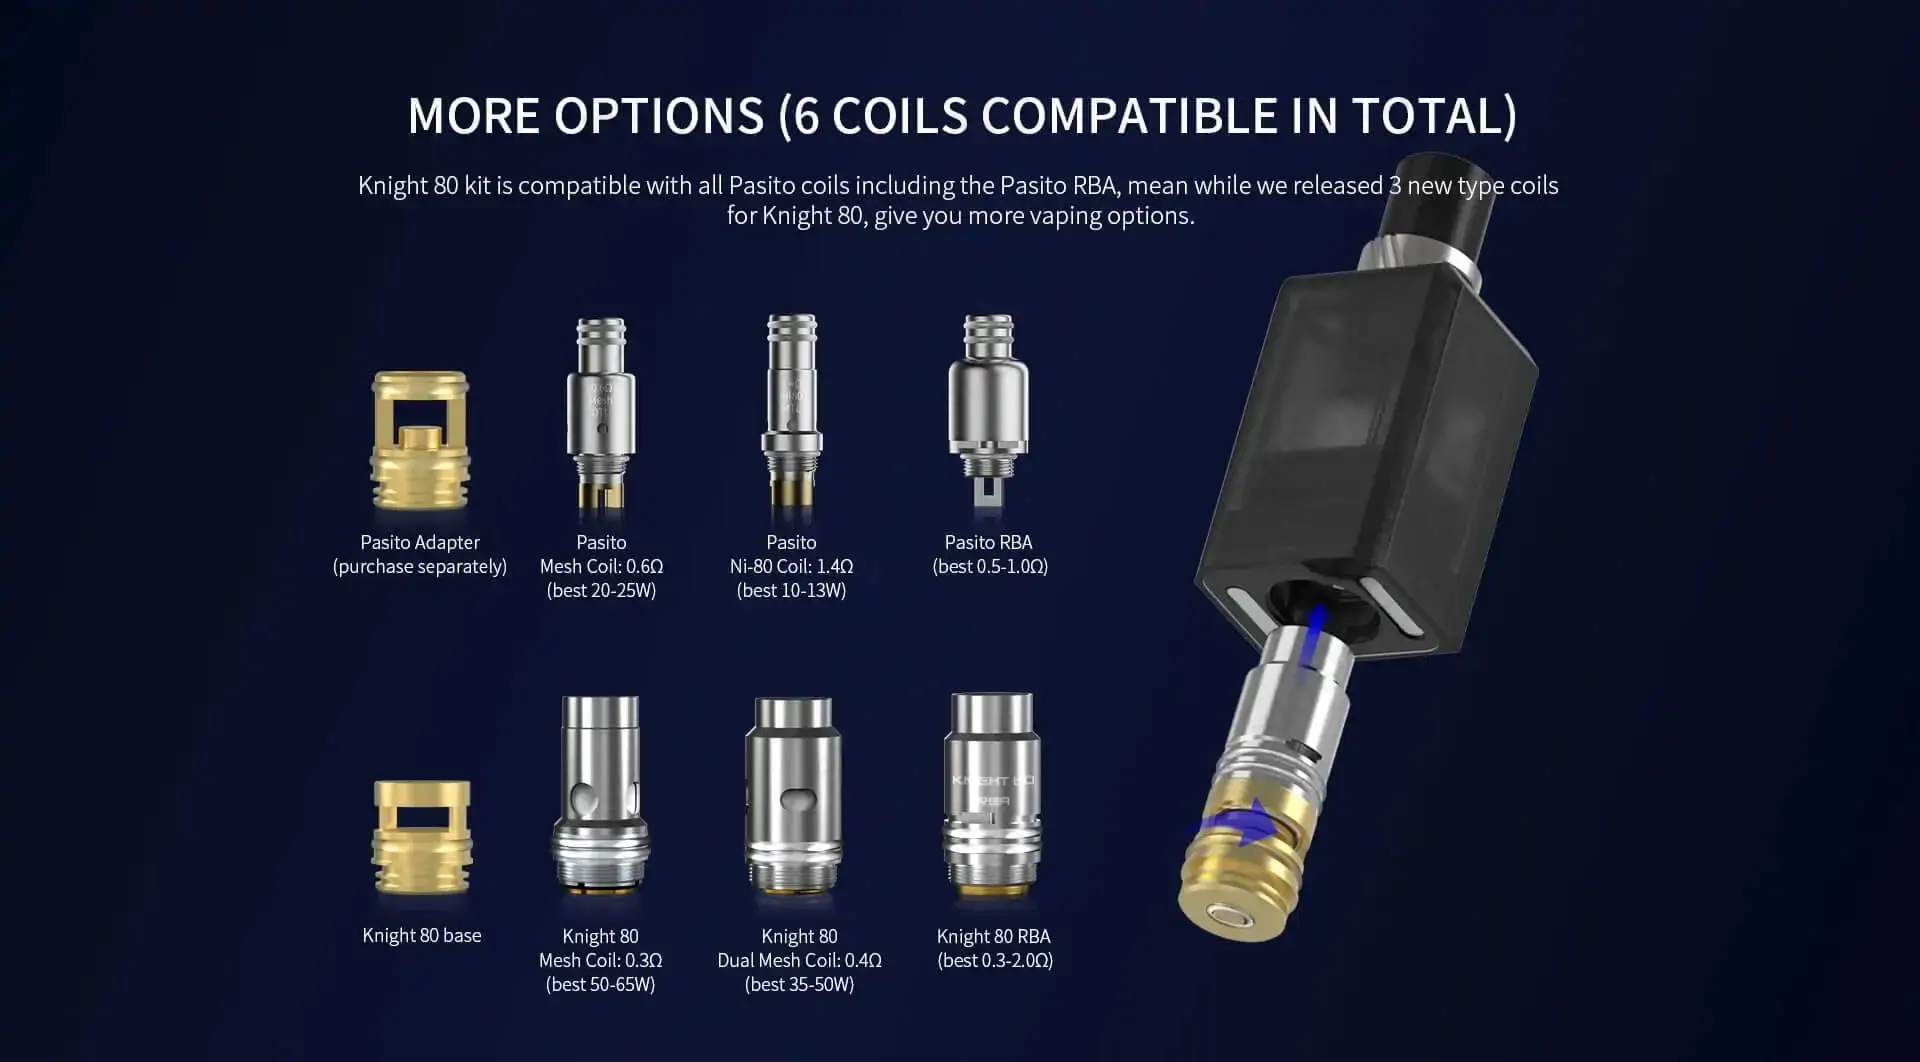 smoant knight replacement coils